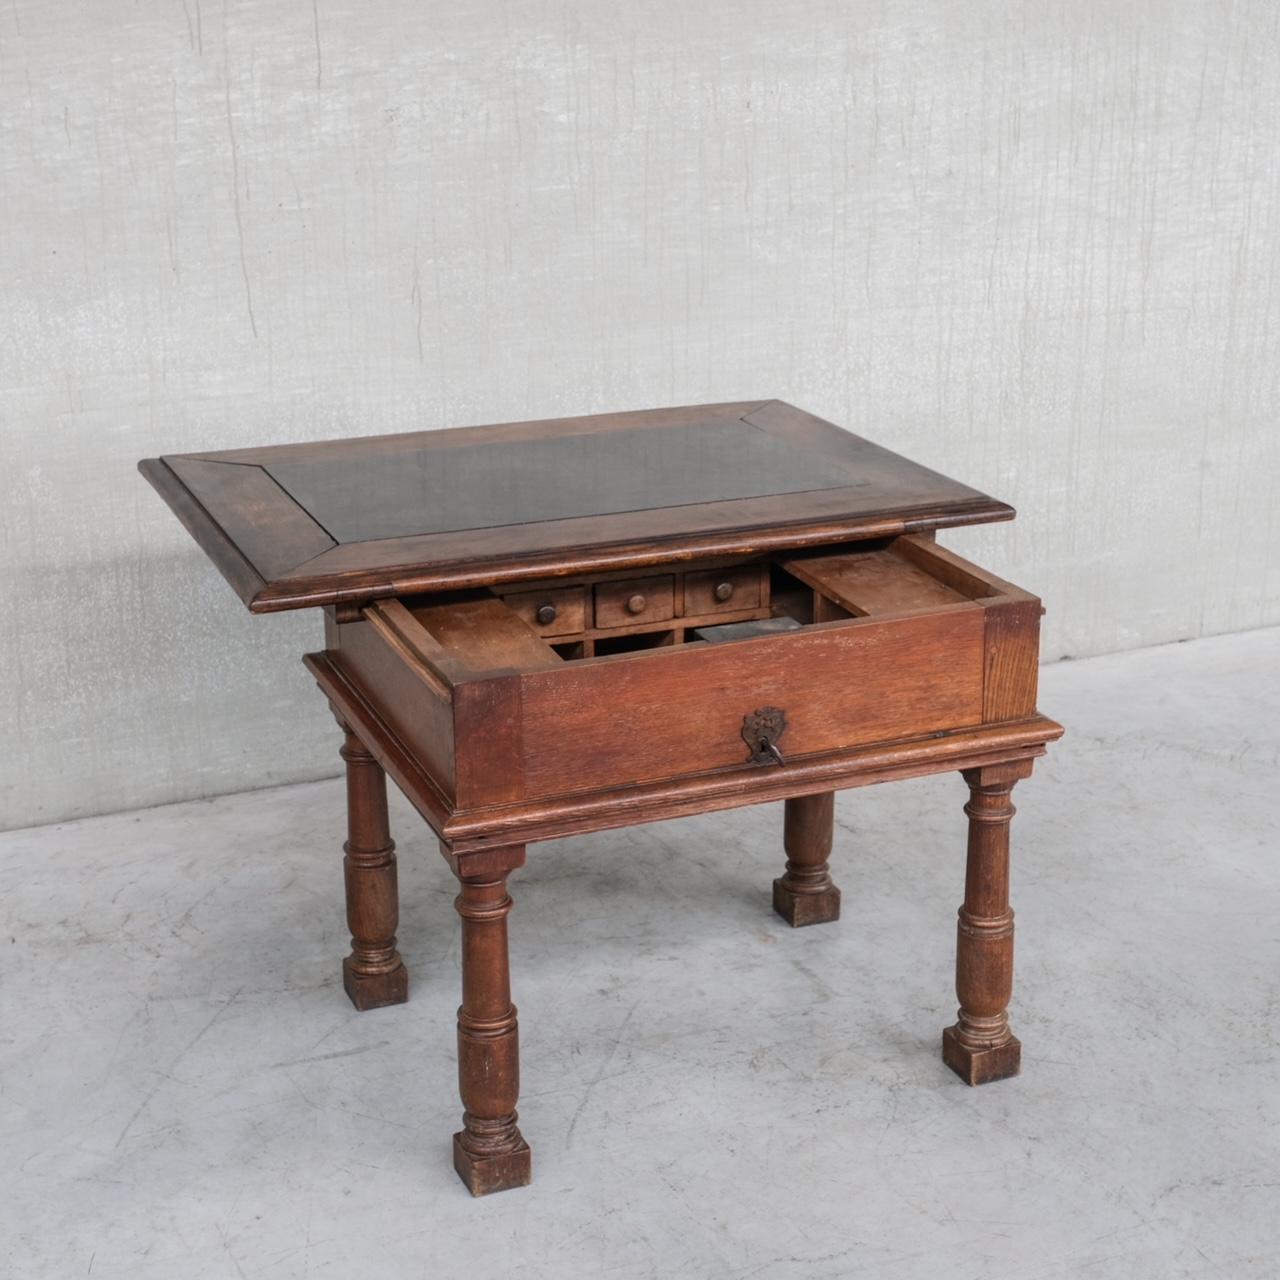 An 17-18th century antique desk. 

Likely Italian, but sourced in France. 

Solid oak with a marble inset top. 

An exceptional table with crafty hidden sliding storage, accessed by a thick high quality decorative key, which is matched by the